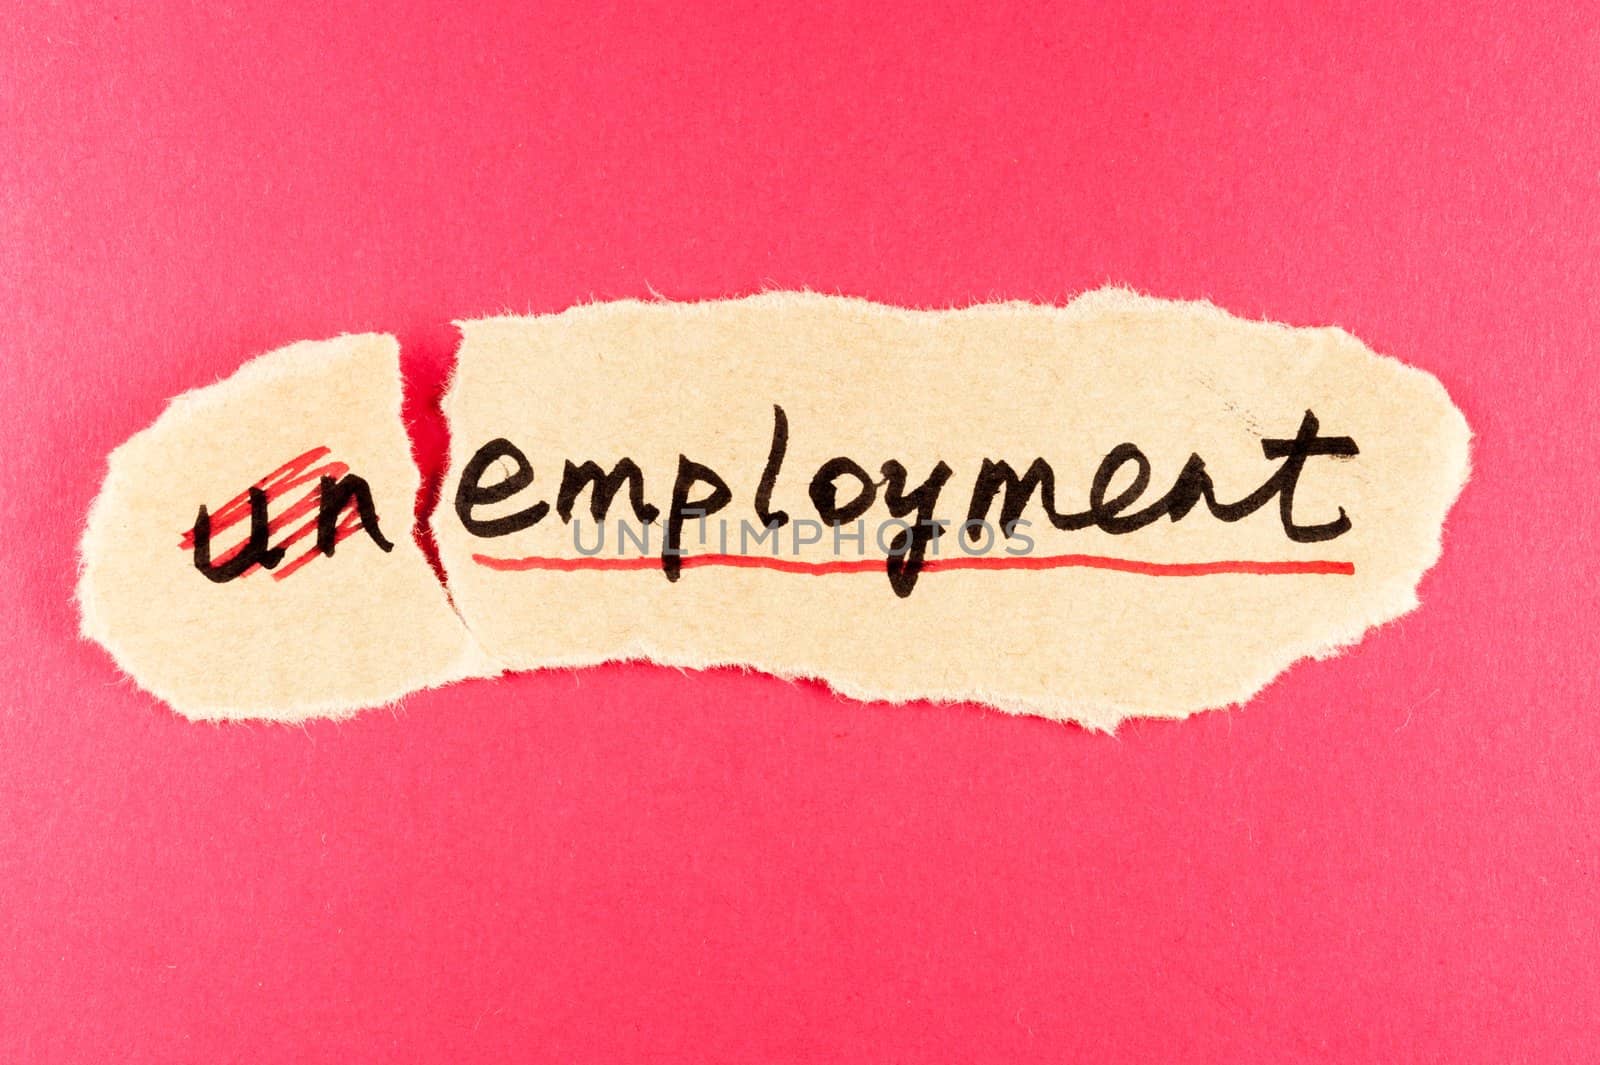 amending unemployment word and changing it  to employment